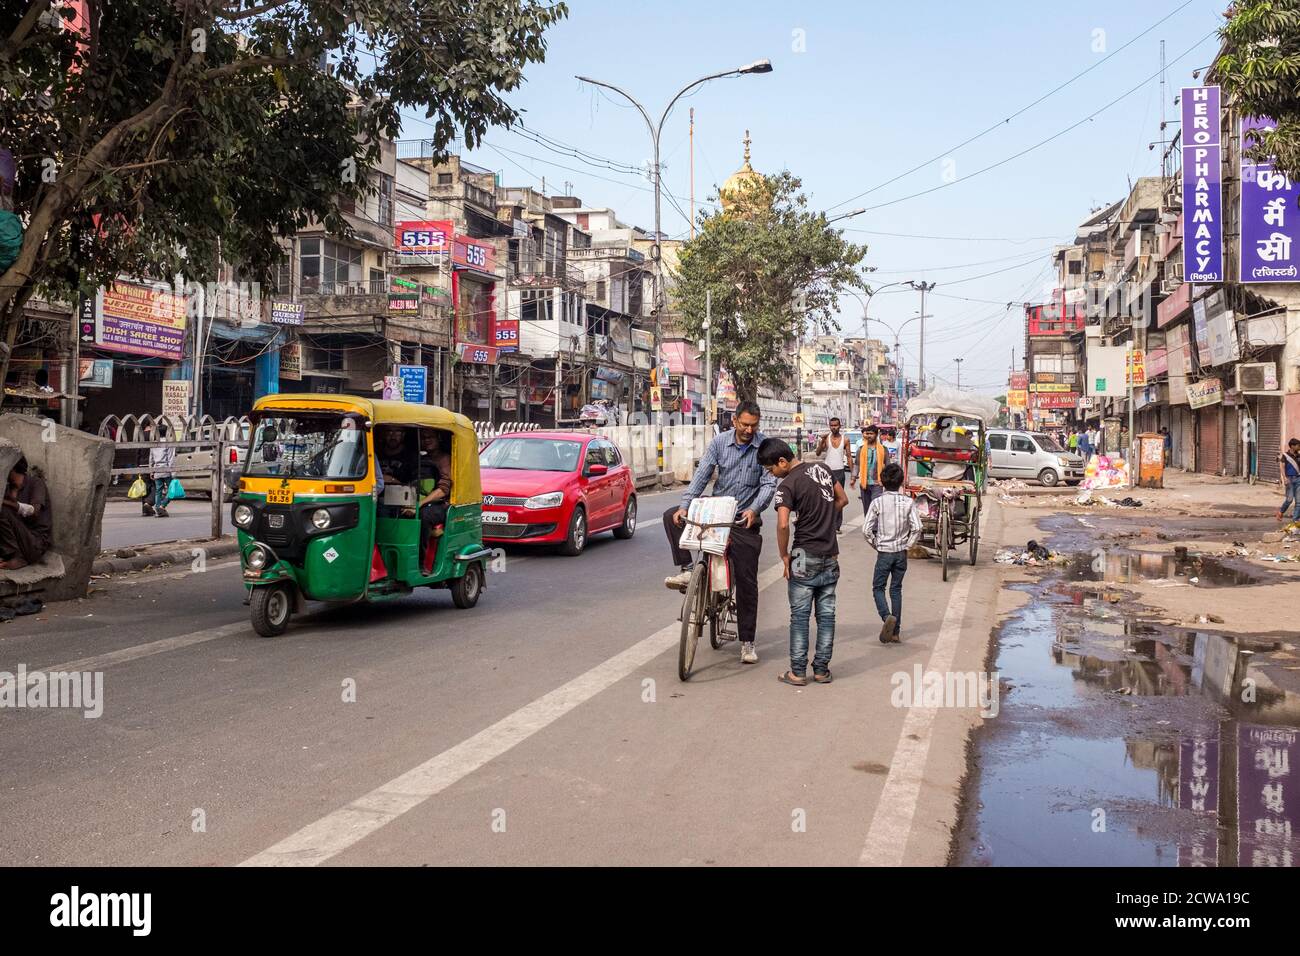 Busy Chandni Chowk Road with tuk-tuks, cars and pedestrians in New Delhi, India Stock Photo